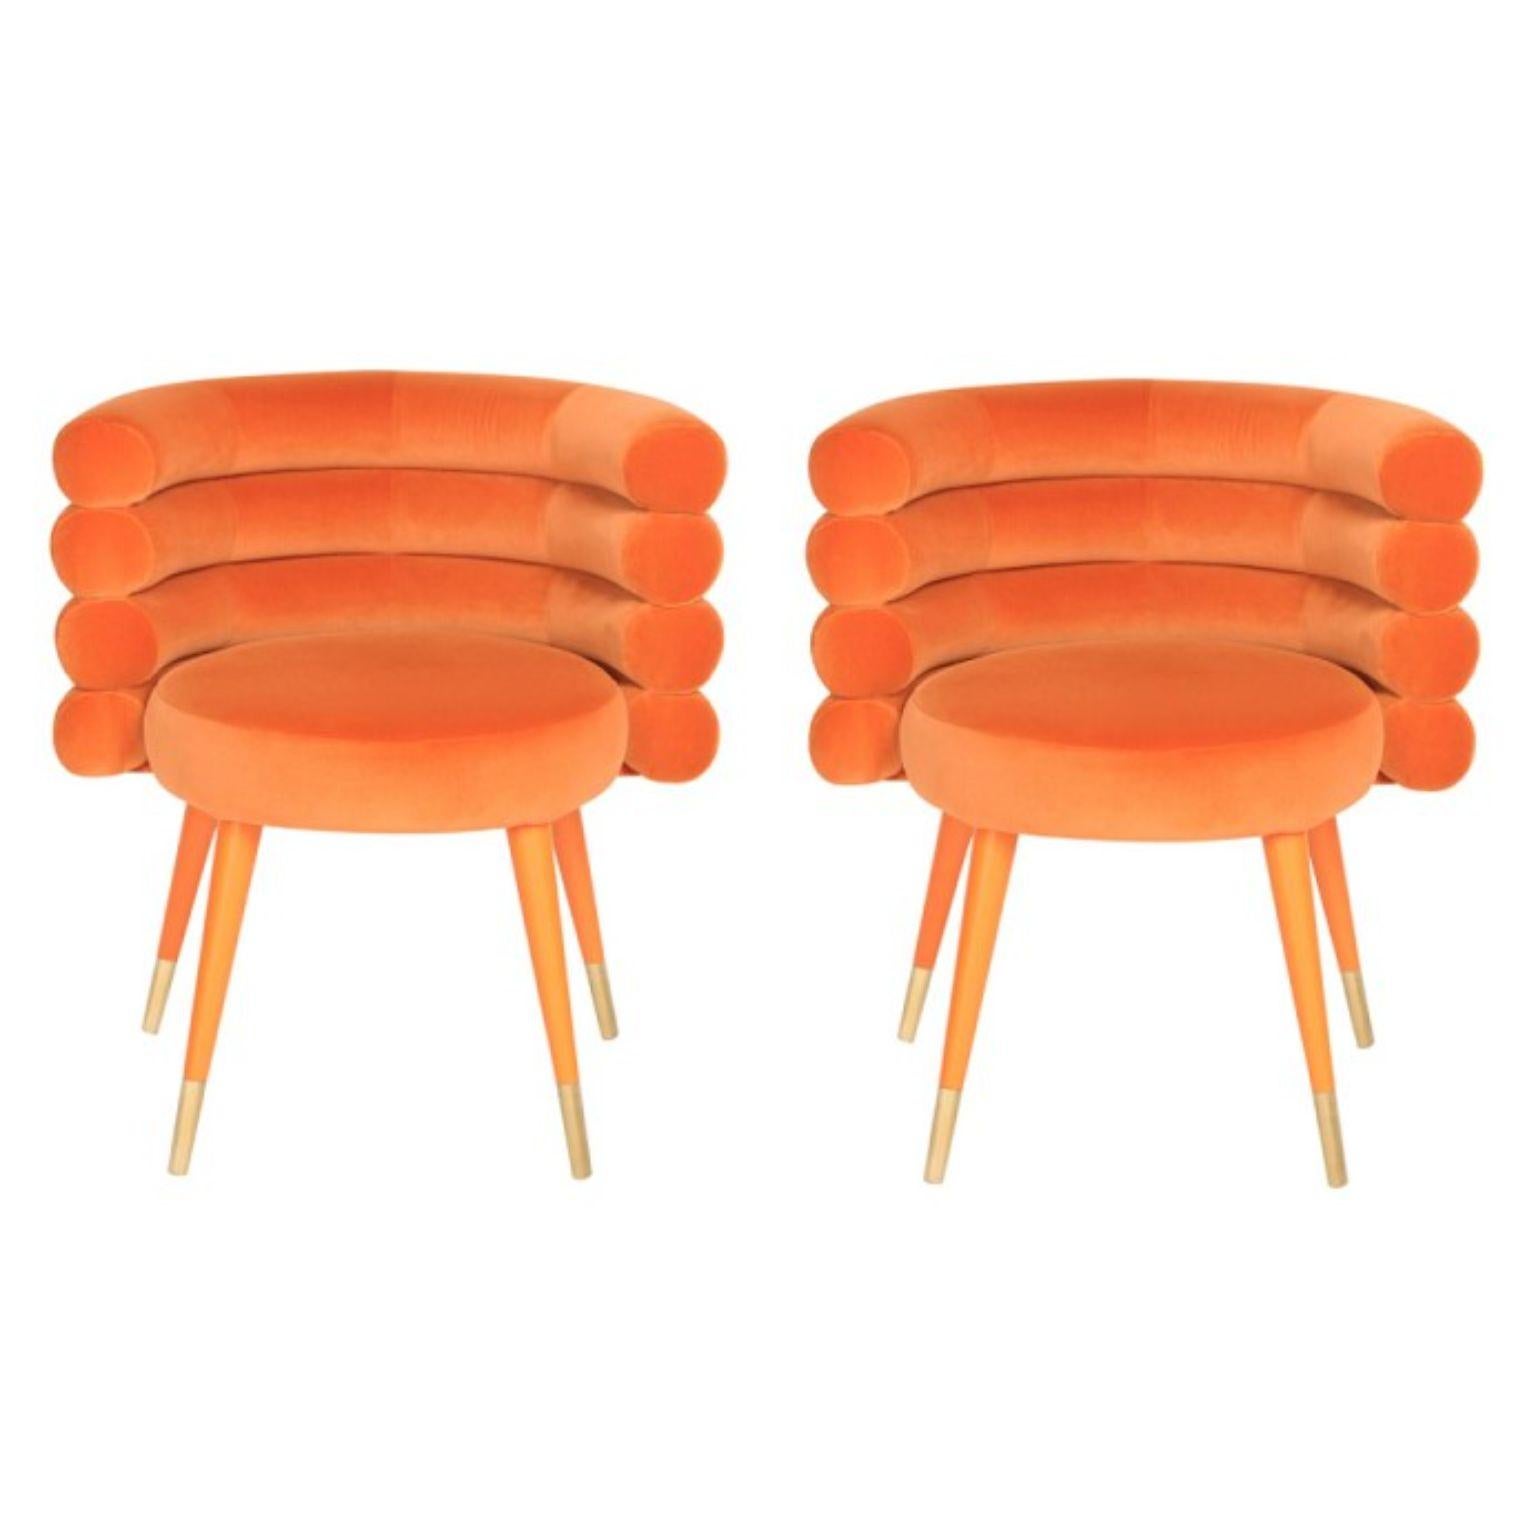 Set of 2 orange marshmallow dining chairs, Royal Stranger
Dimensions: 78 x 70 x 60 cm
Materials: velvet upholstery and brass
Available in: mint green, light pink, royal green and royal red

Royal Stranger is an exclusive furniture brand